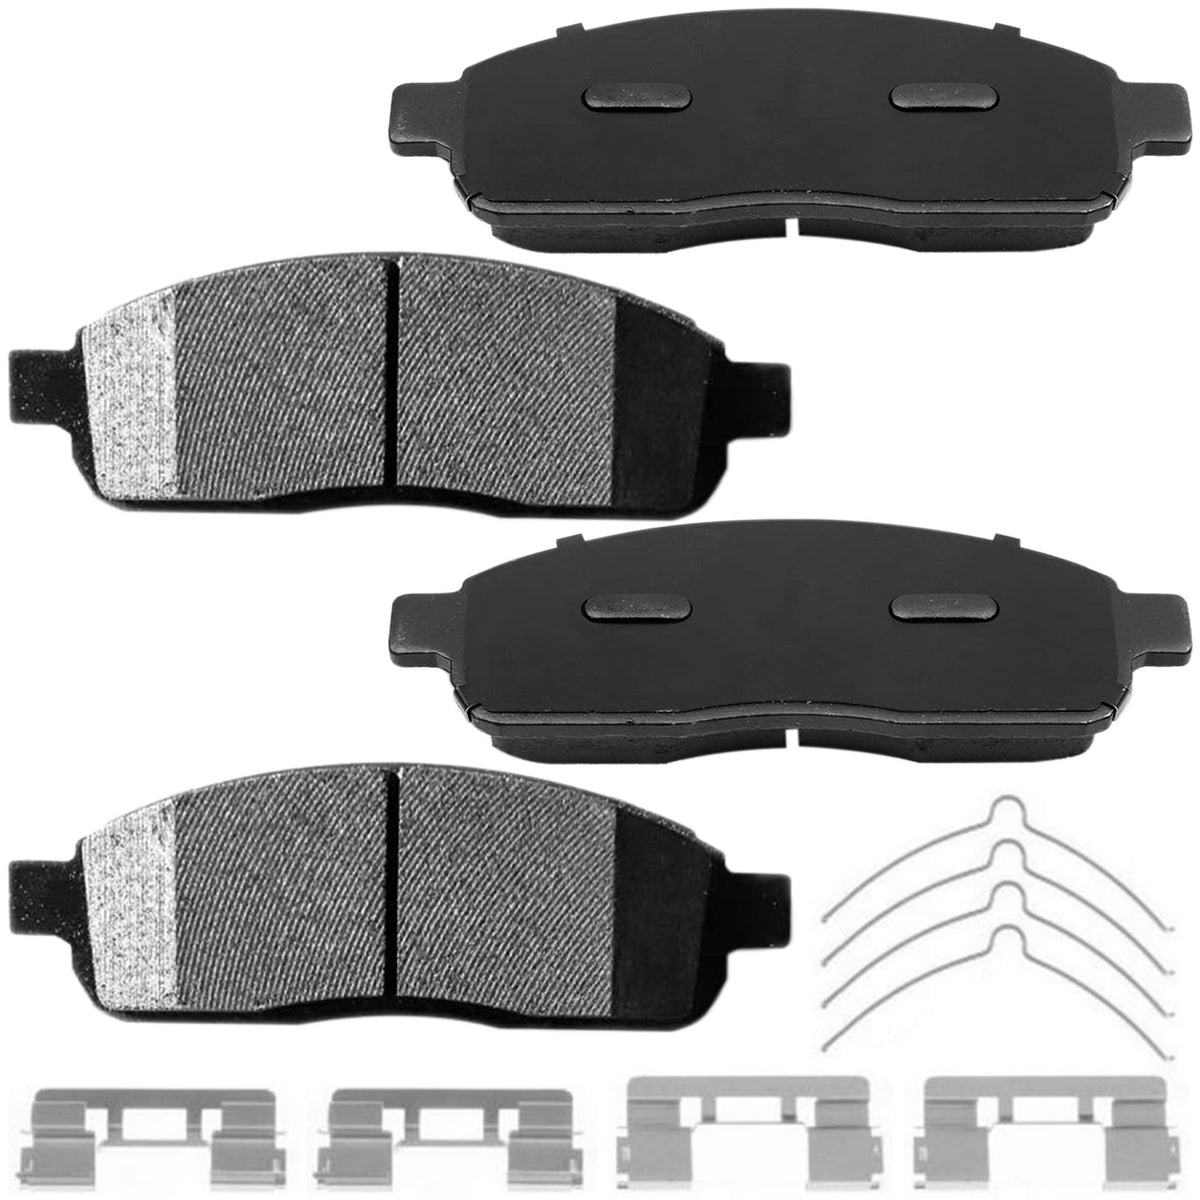 Front Ceramic Brake Pads w/Hardware Kits Fits for Ford F-150 2005-2008,  Lincoln Mark LT 2006-2008 Low Dust Brake Pad (All Models)-4 Pack